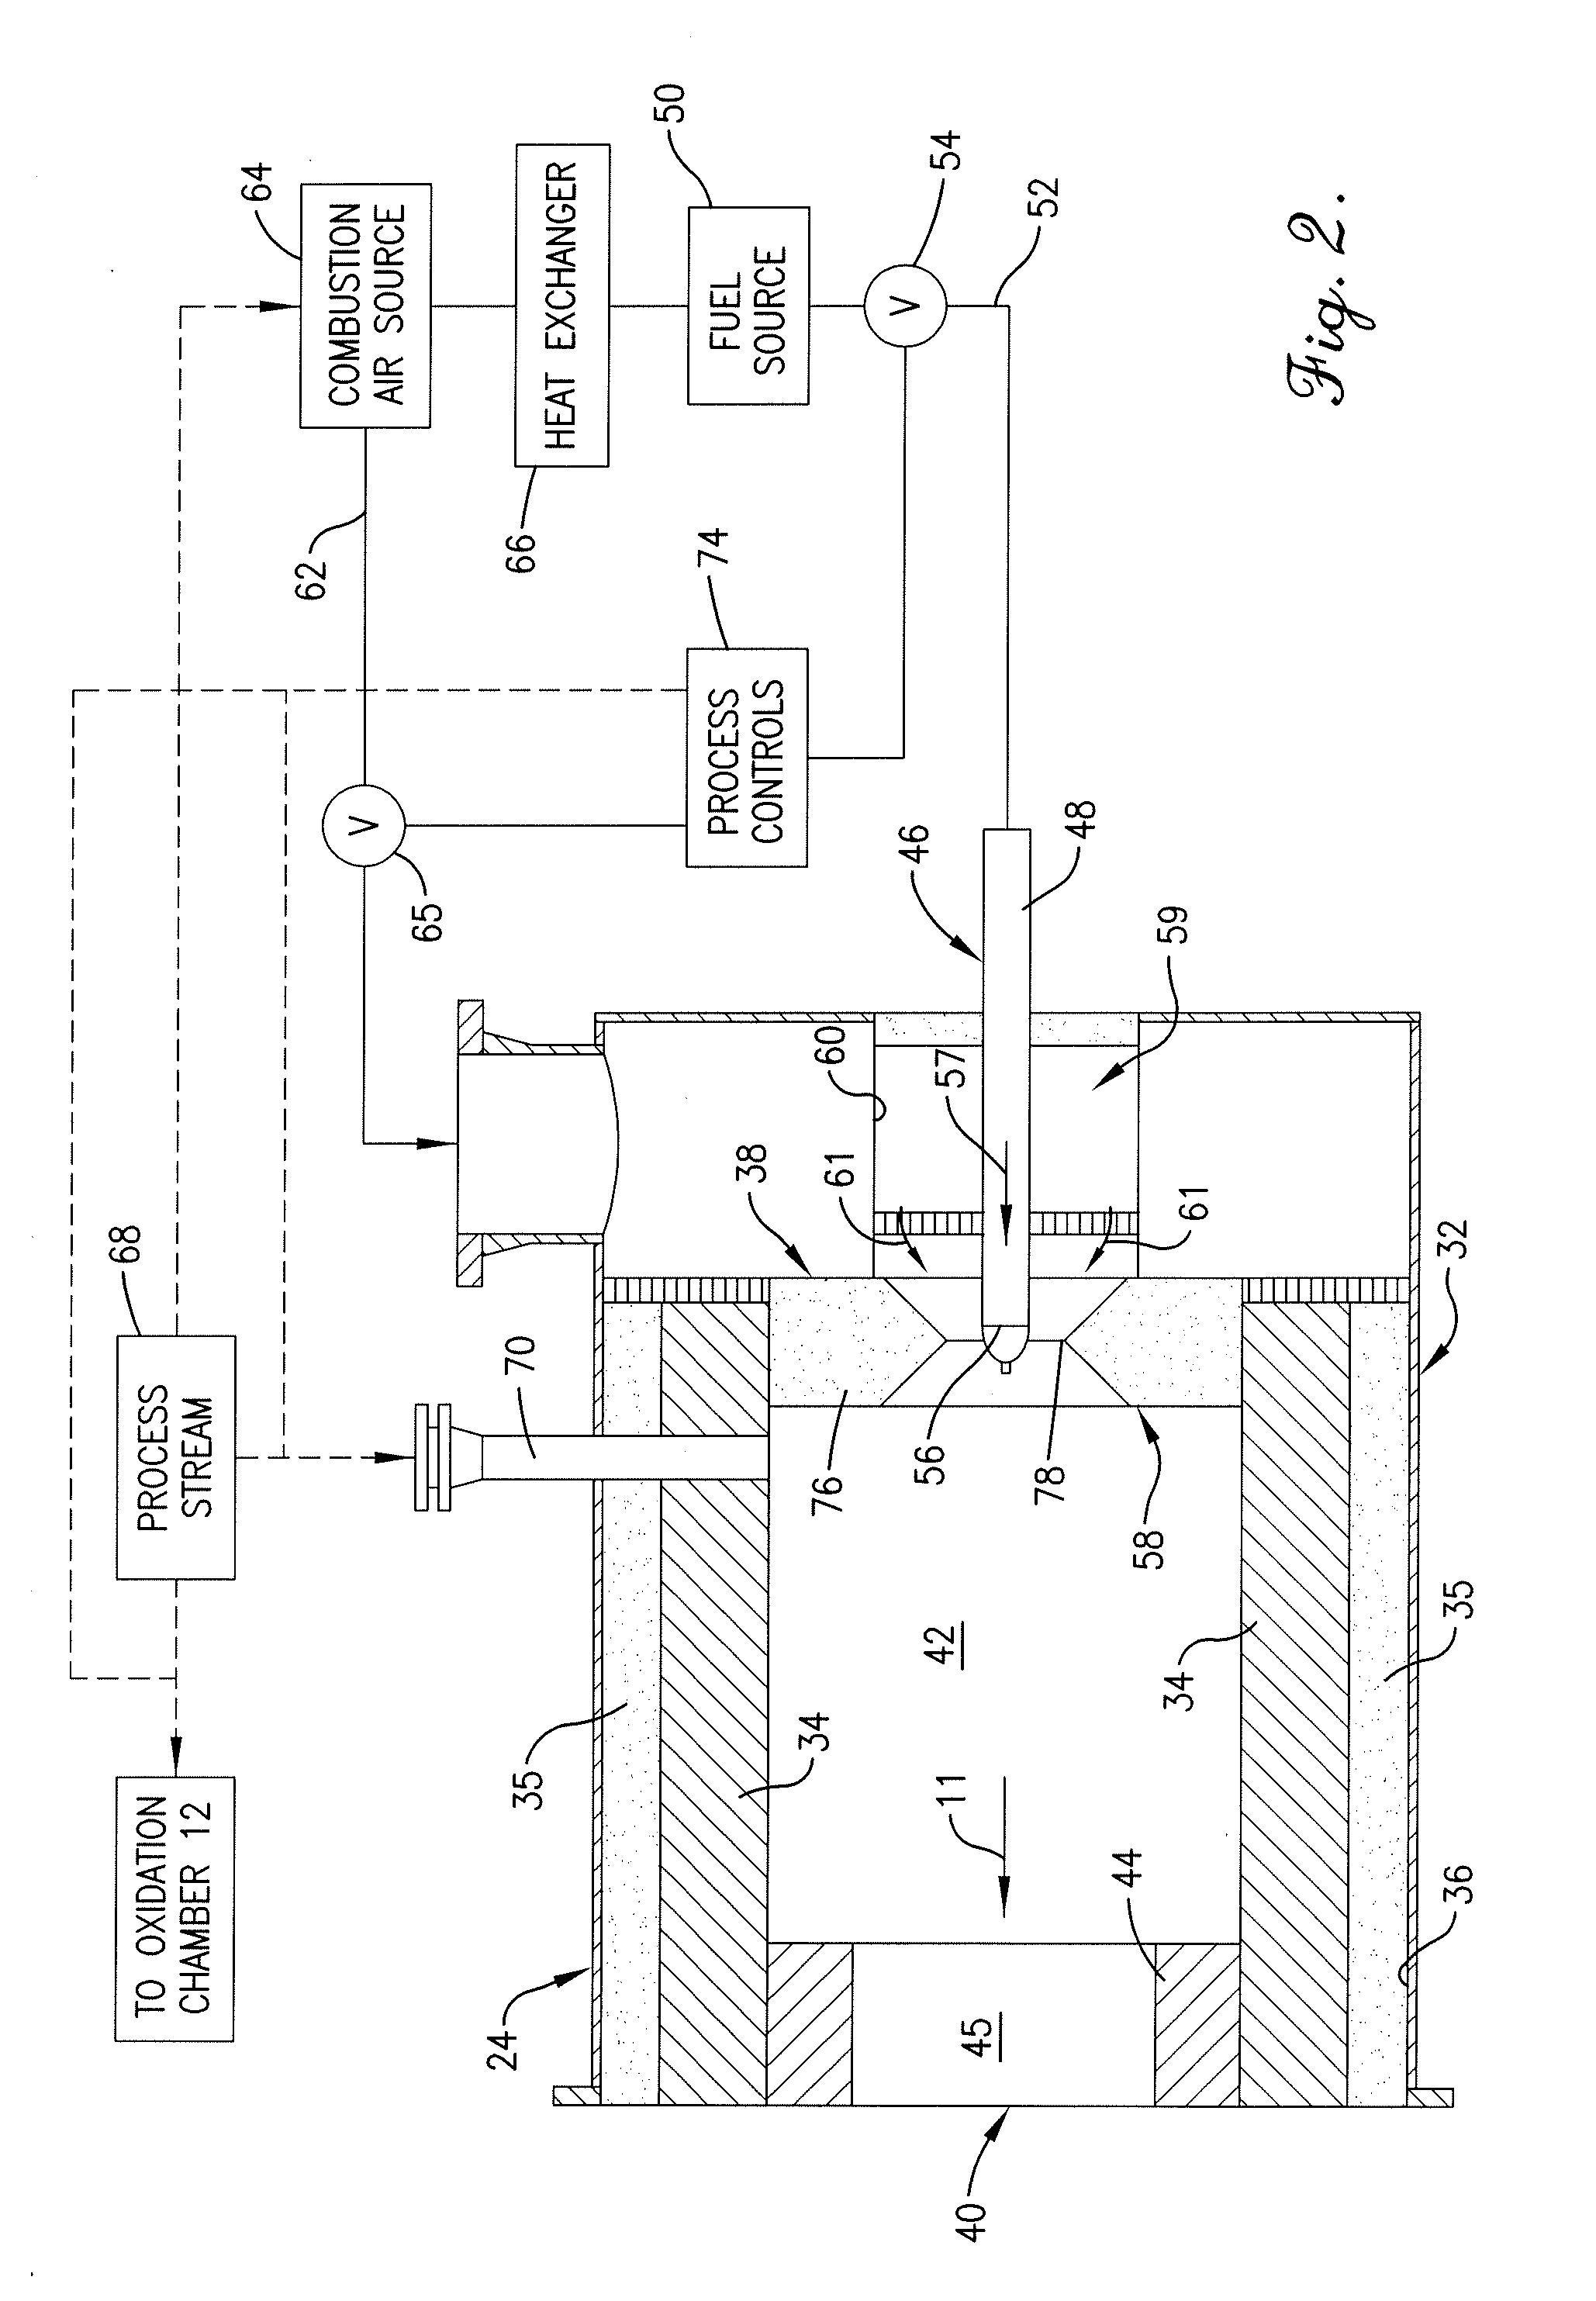 Flameless thermal oxidation method